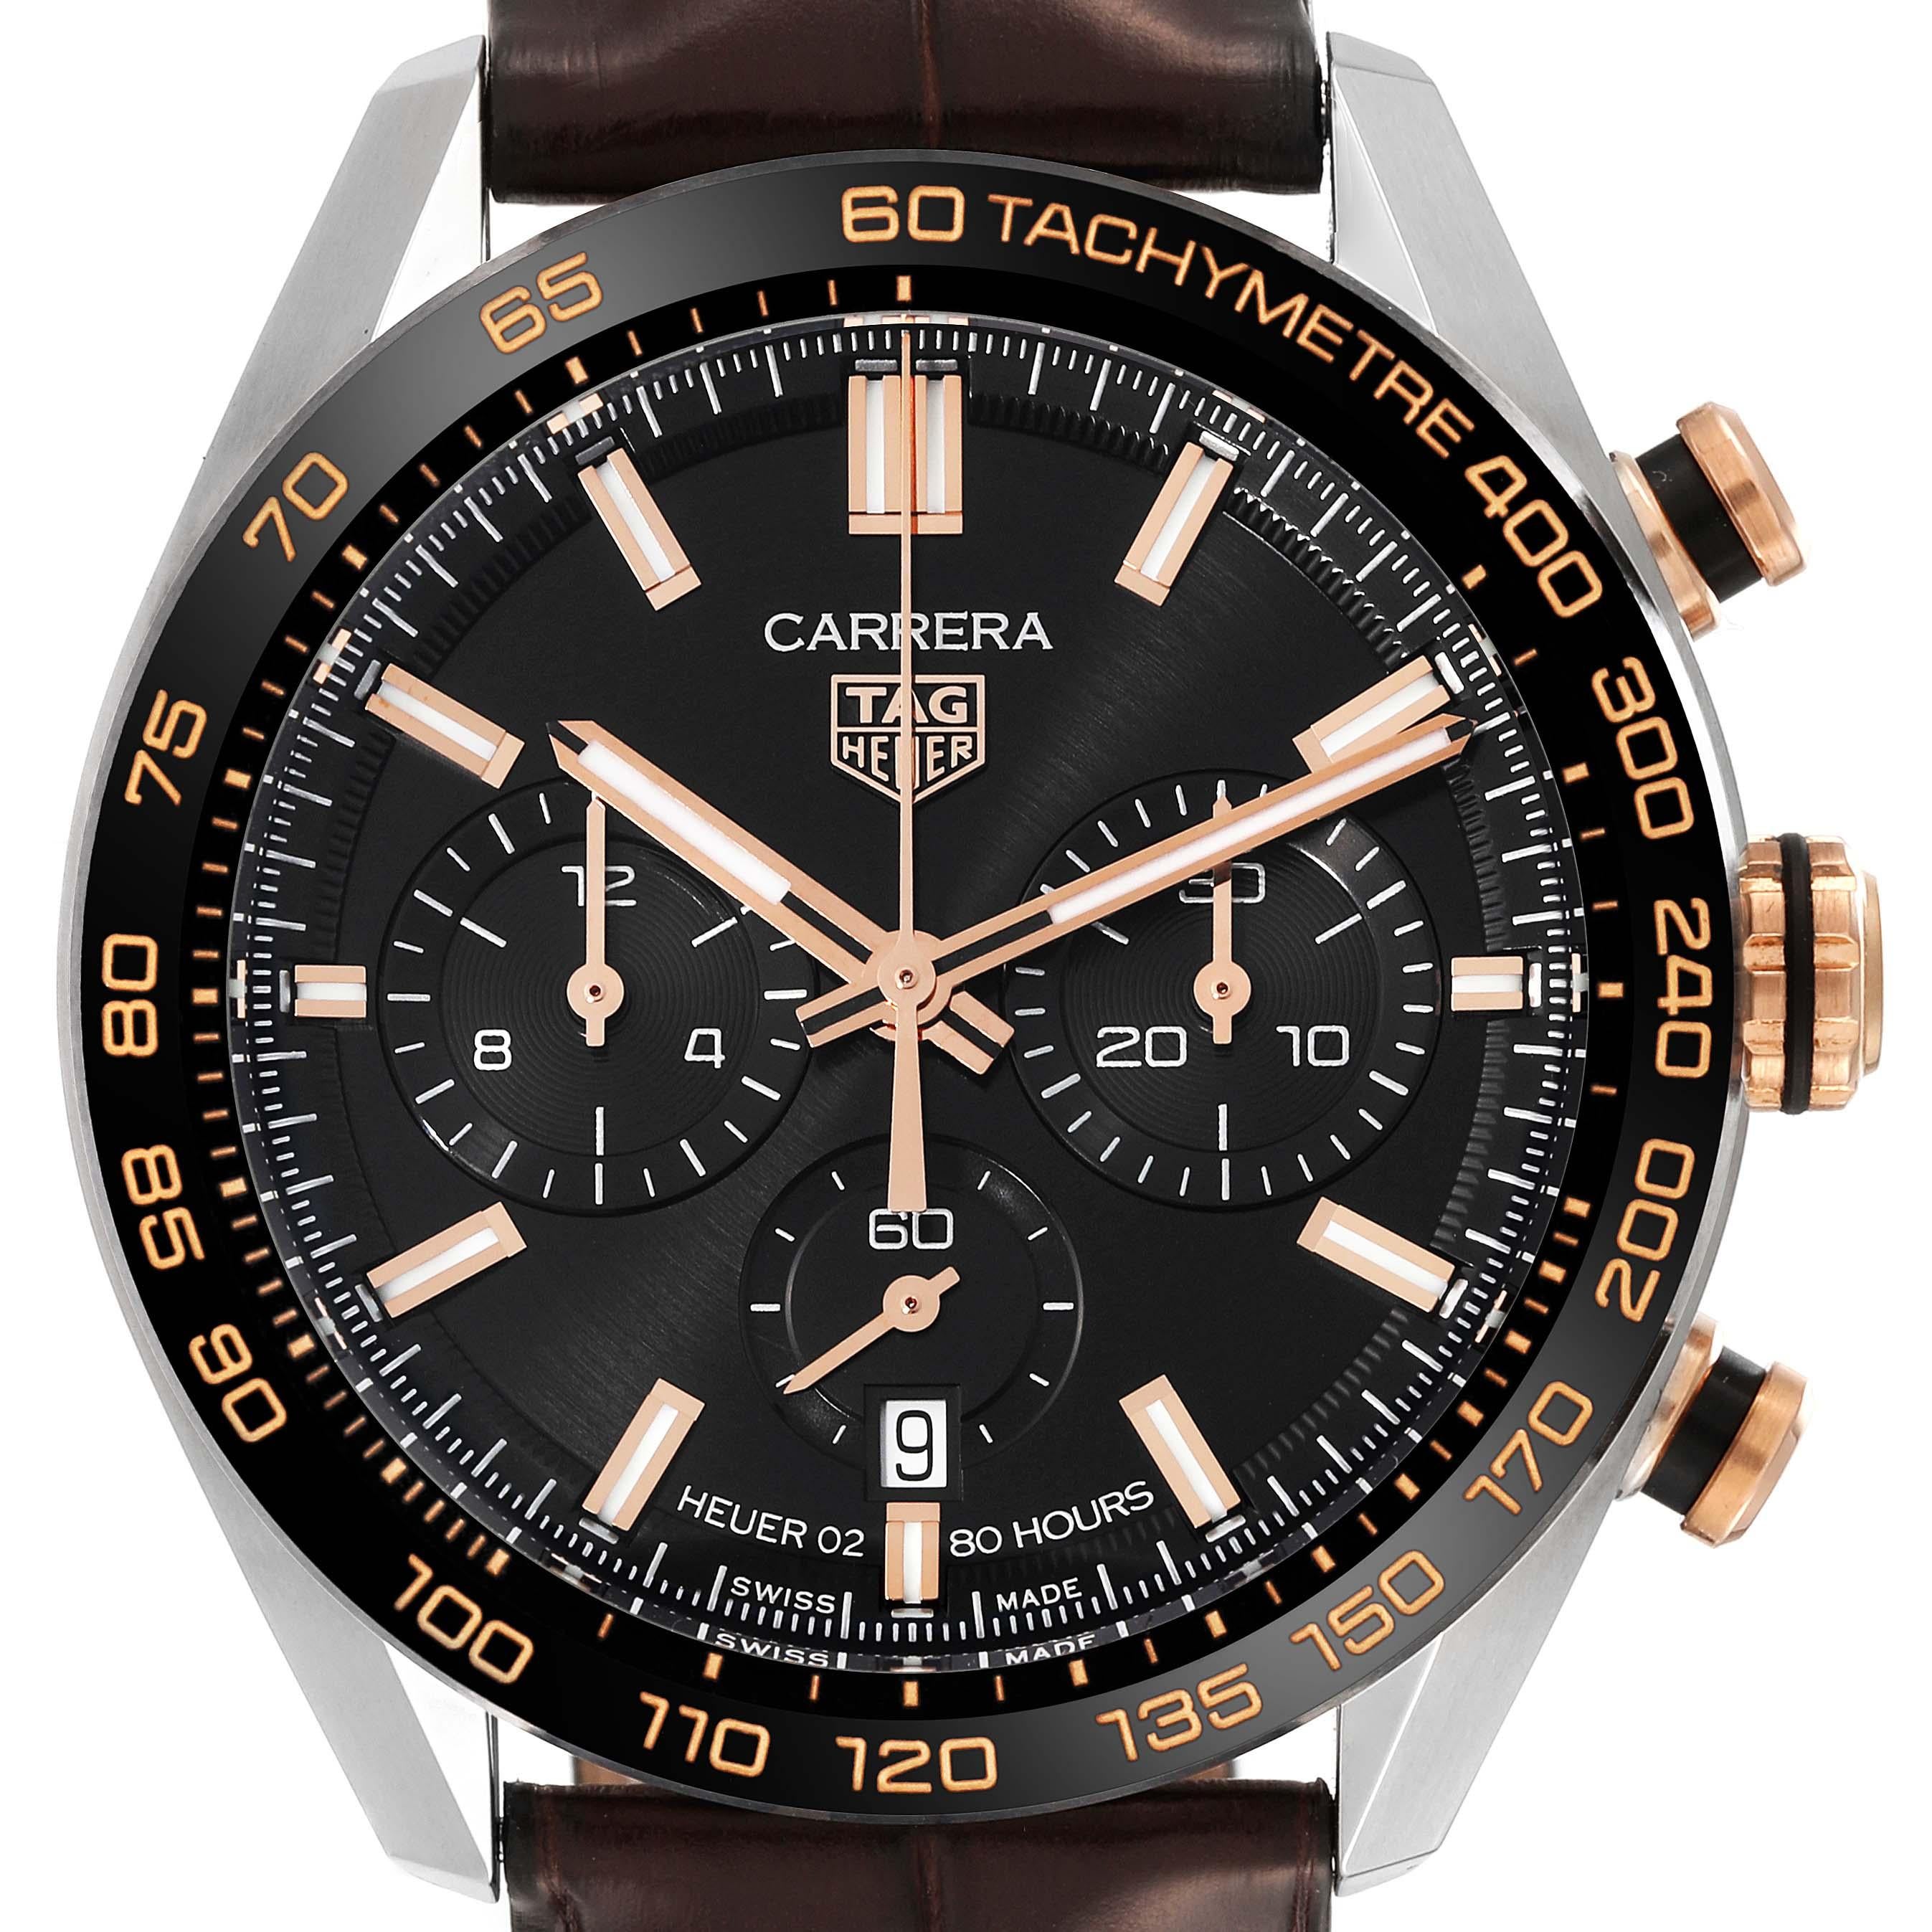 Tag Heuer Carrera Chronograph Steel Rose Gold Mens Watch CBN2A5A Box Card. Automatic self-winding chronograph movement. Stainless steel  44.0 mm in diameter case. Rose gold crown and pushers. Transparent exhibition sapphire caseback. Black ceramic